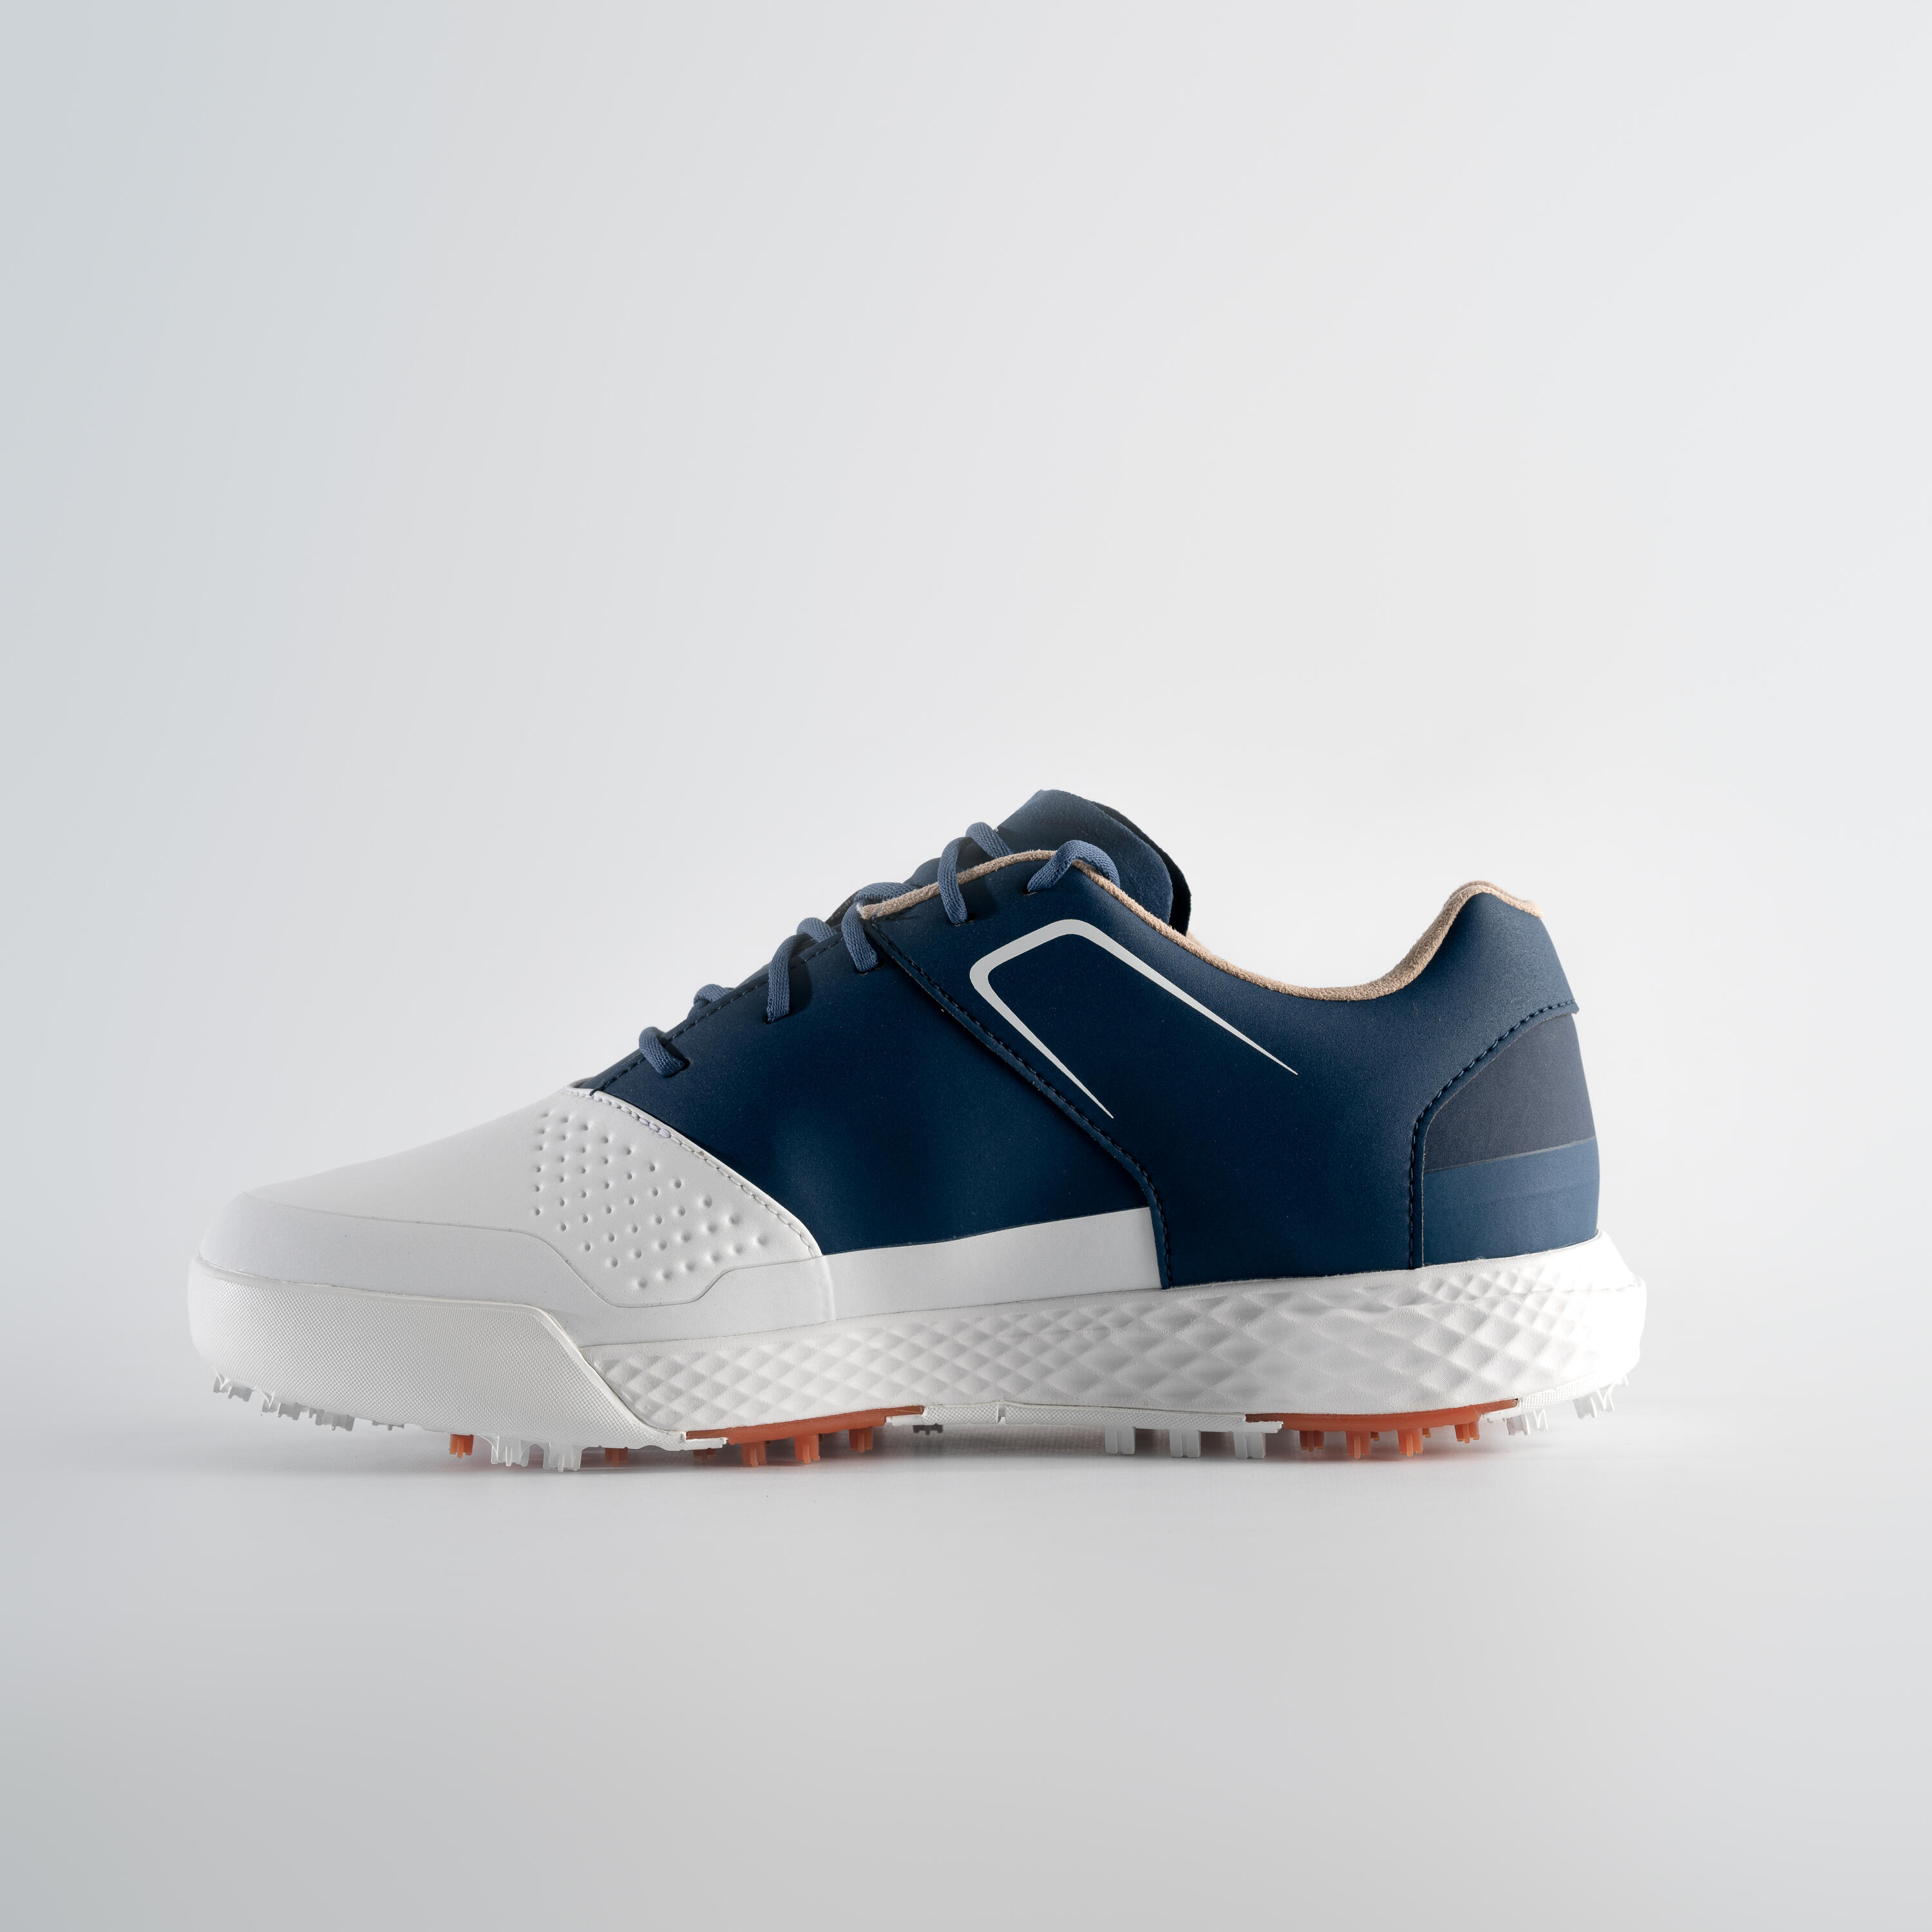 Men's golf waterproof grip shoes - white and blue 3/7